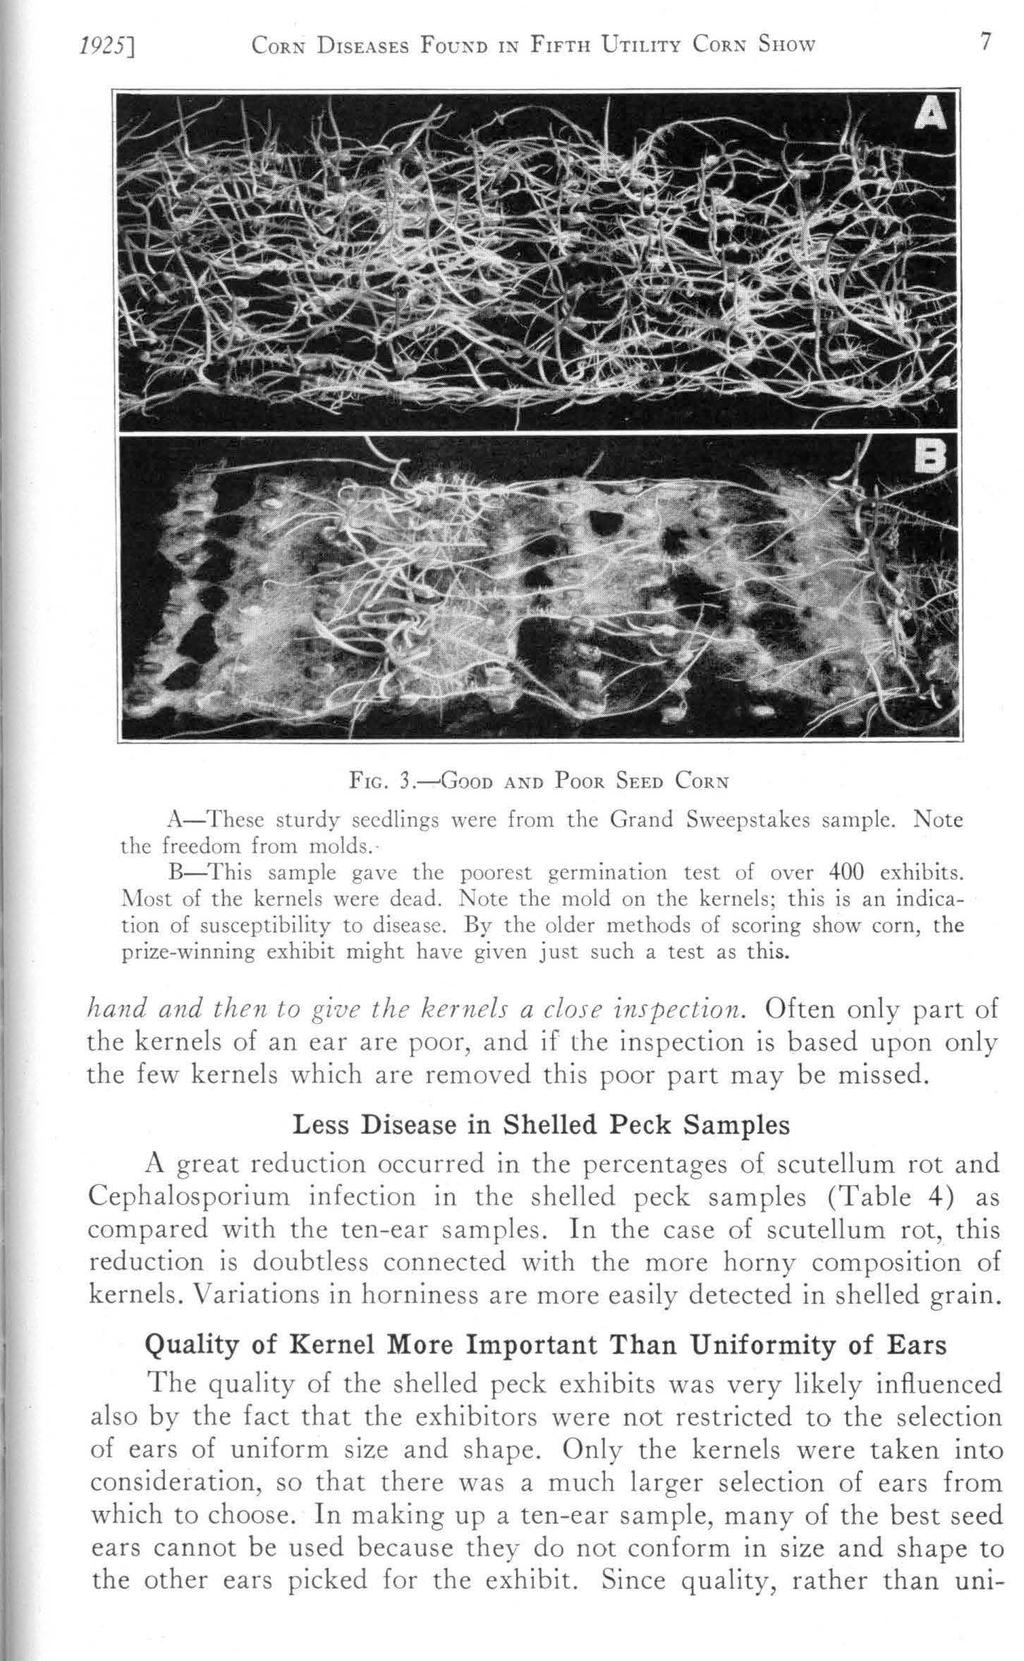 1925] CoRN DISEASES FouND IN FIFTH UTILITY CoRN SHow 7 FIG. 3.~GooD AND PooR SEED CoRN A-These sturdy seedlings were from the Grand Sweepstakes sample. Note the freedom from molds.